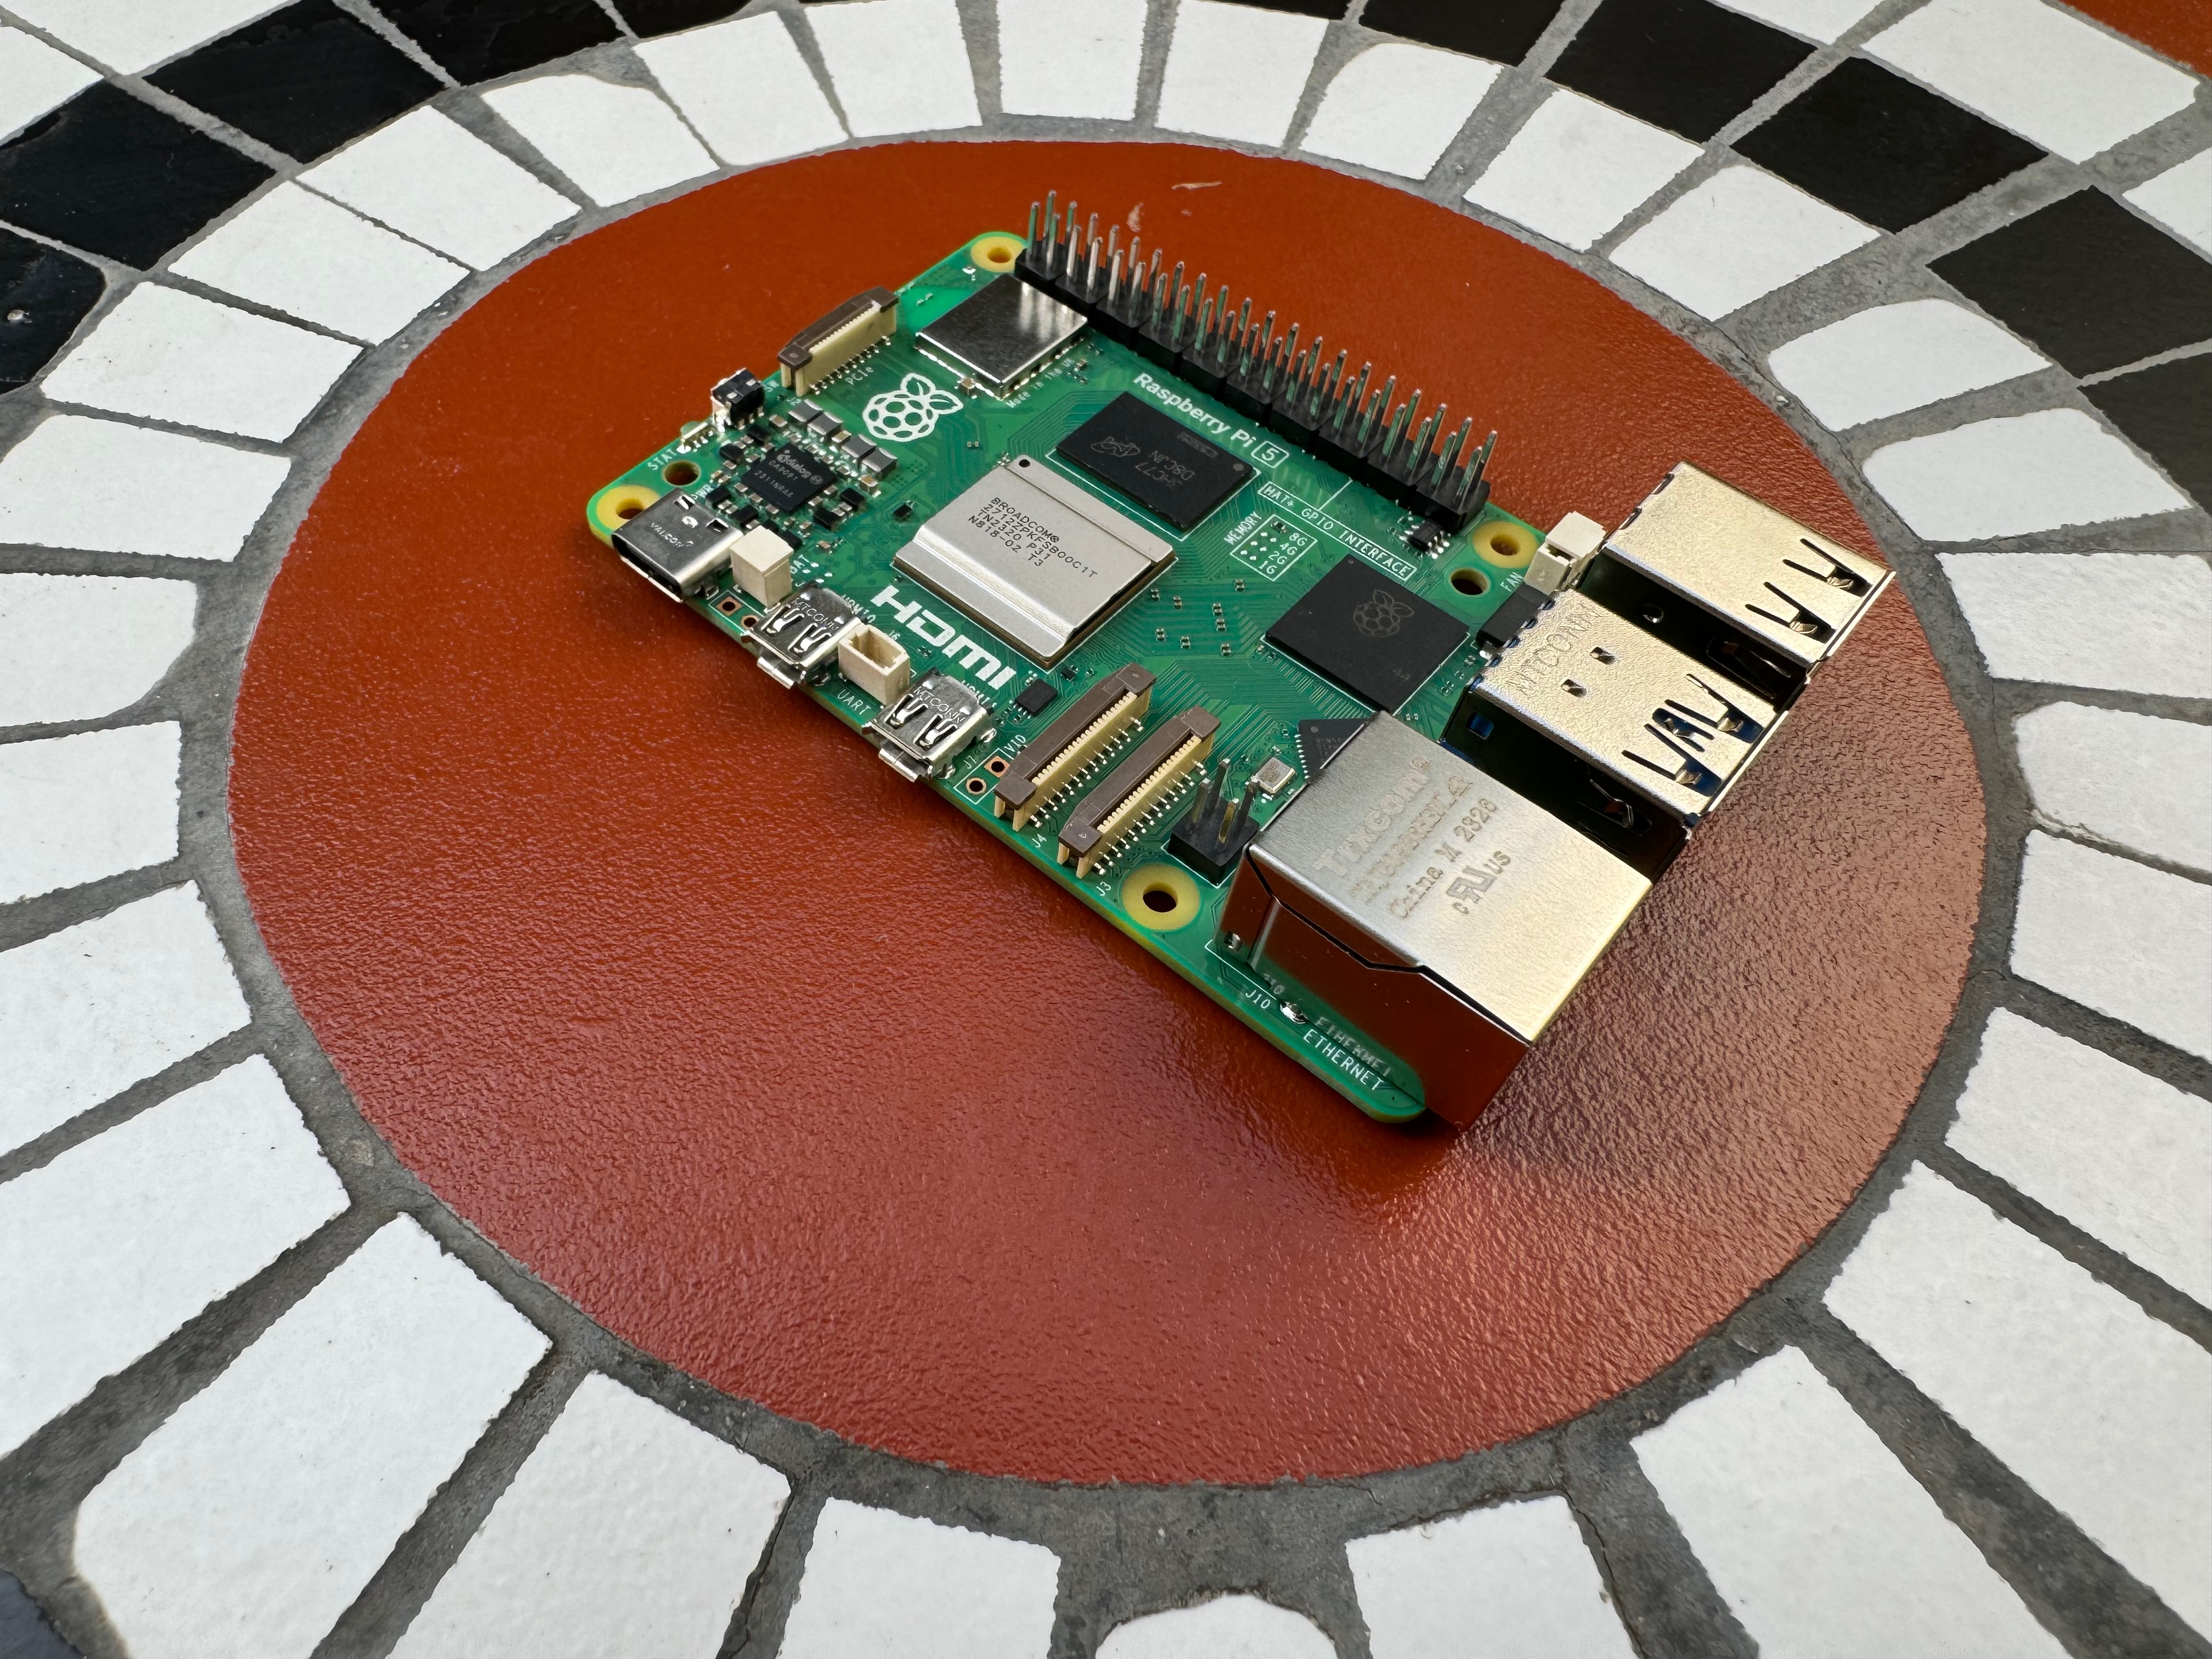 When did Raspberry Pi get so expensive?